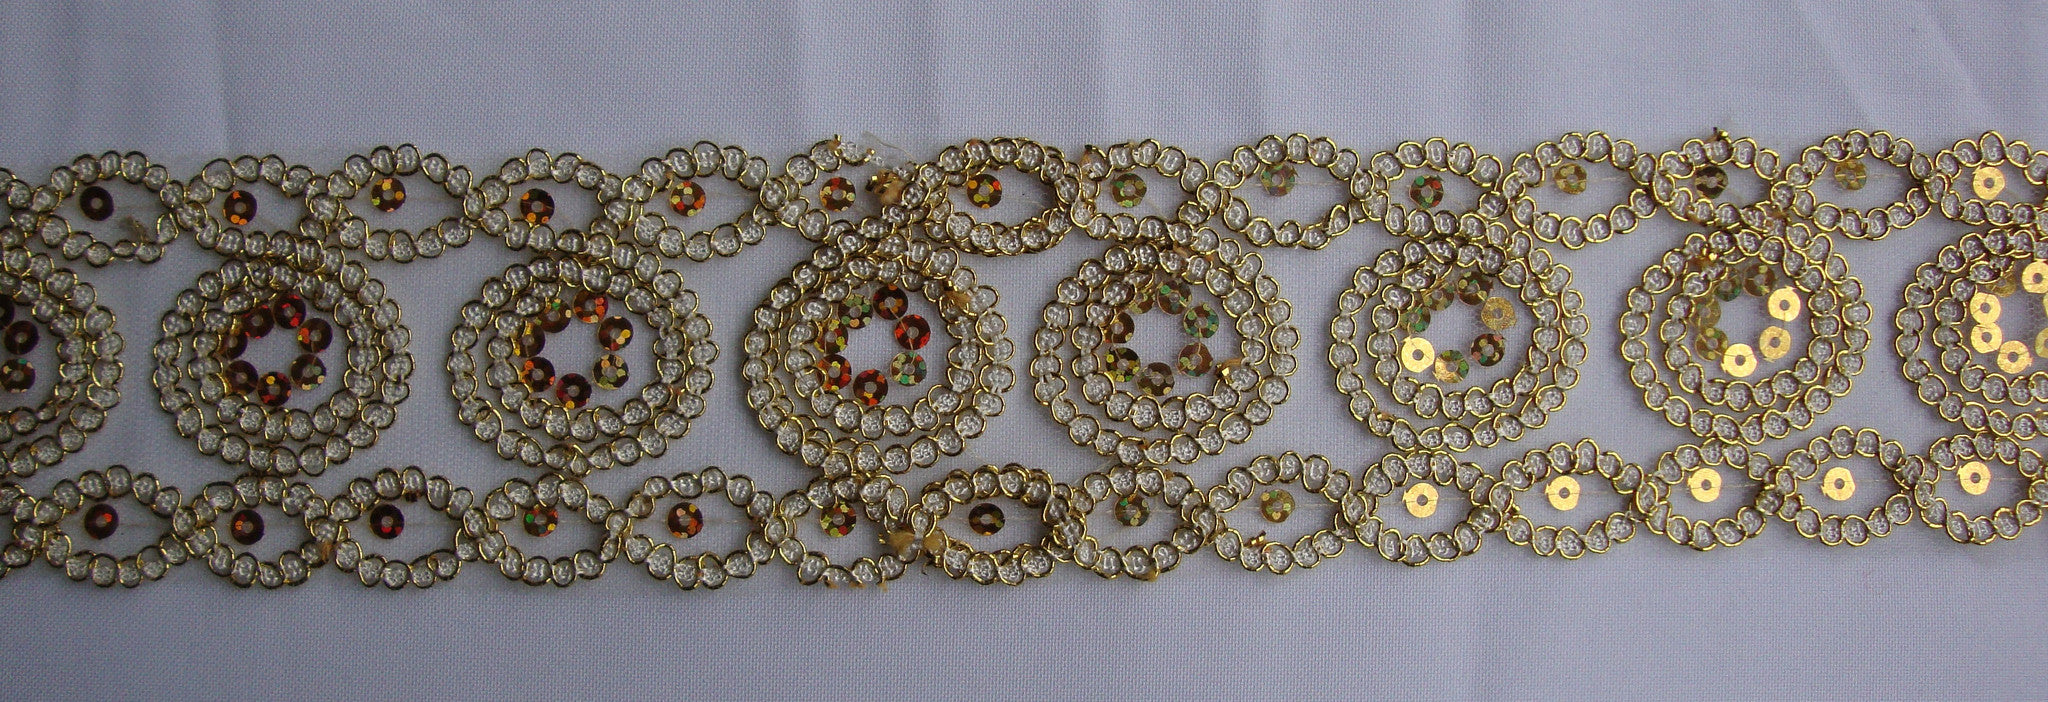 Gold Lace Trimming (Sold as a 2 yard piece)